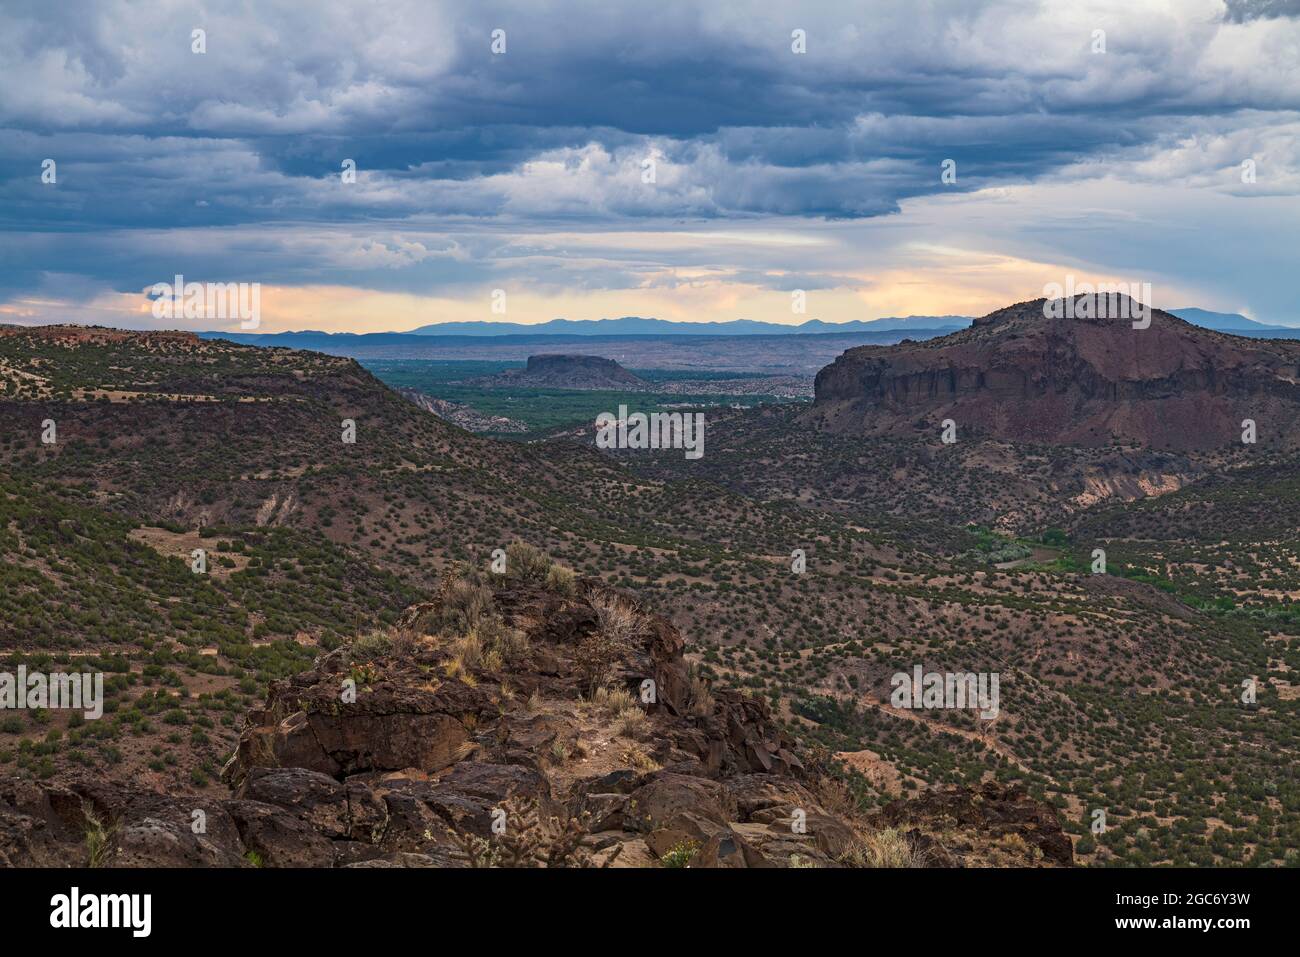 Usa, New Mexico, White Rock, Storm clouds gathering over White Rock Overlook Stock Photo